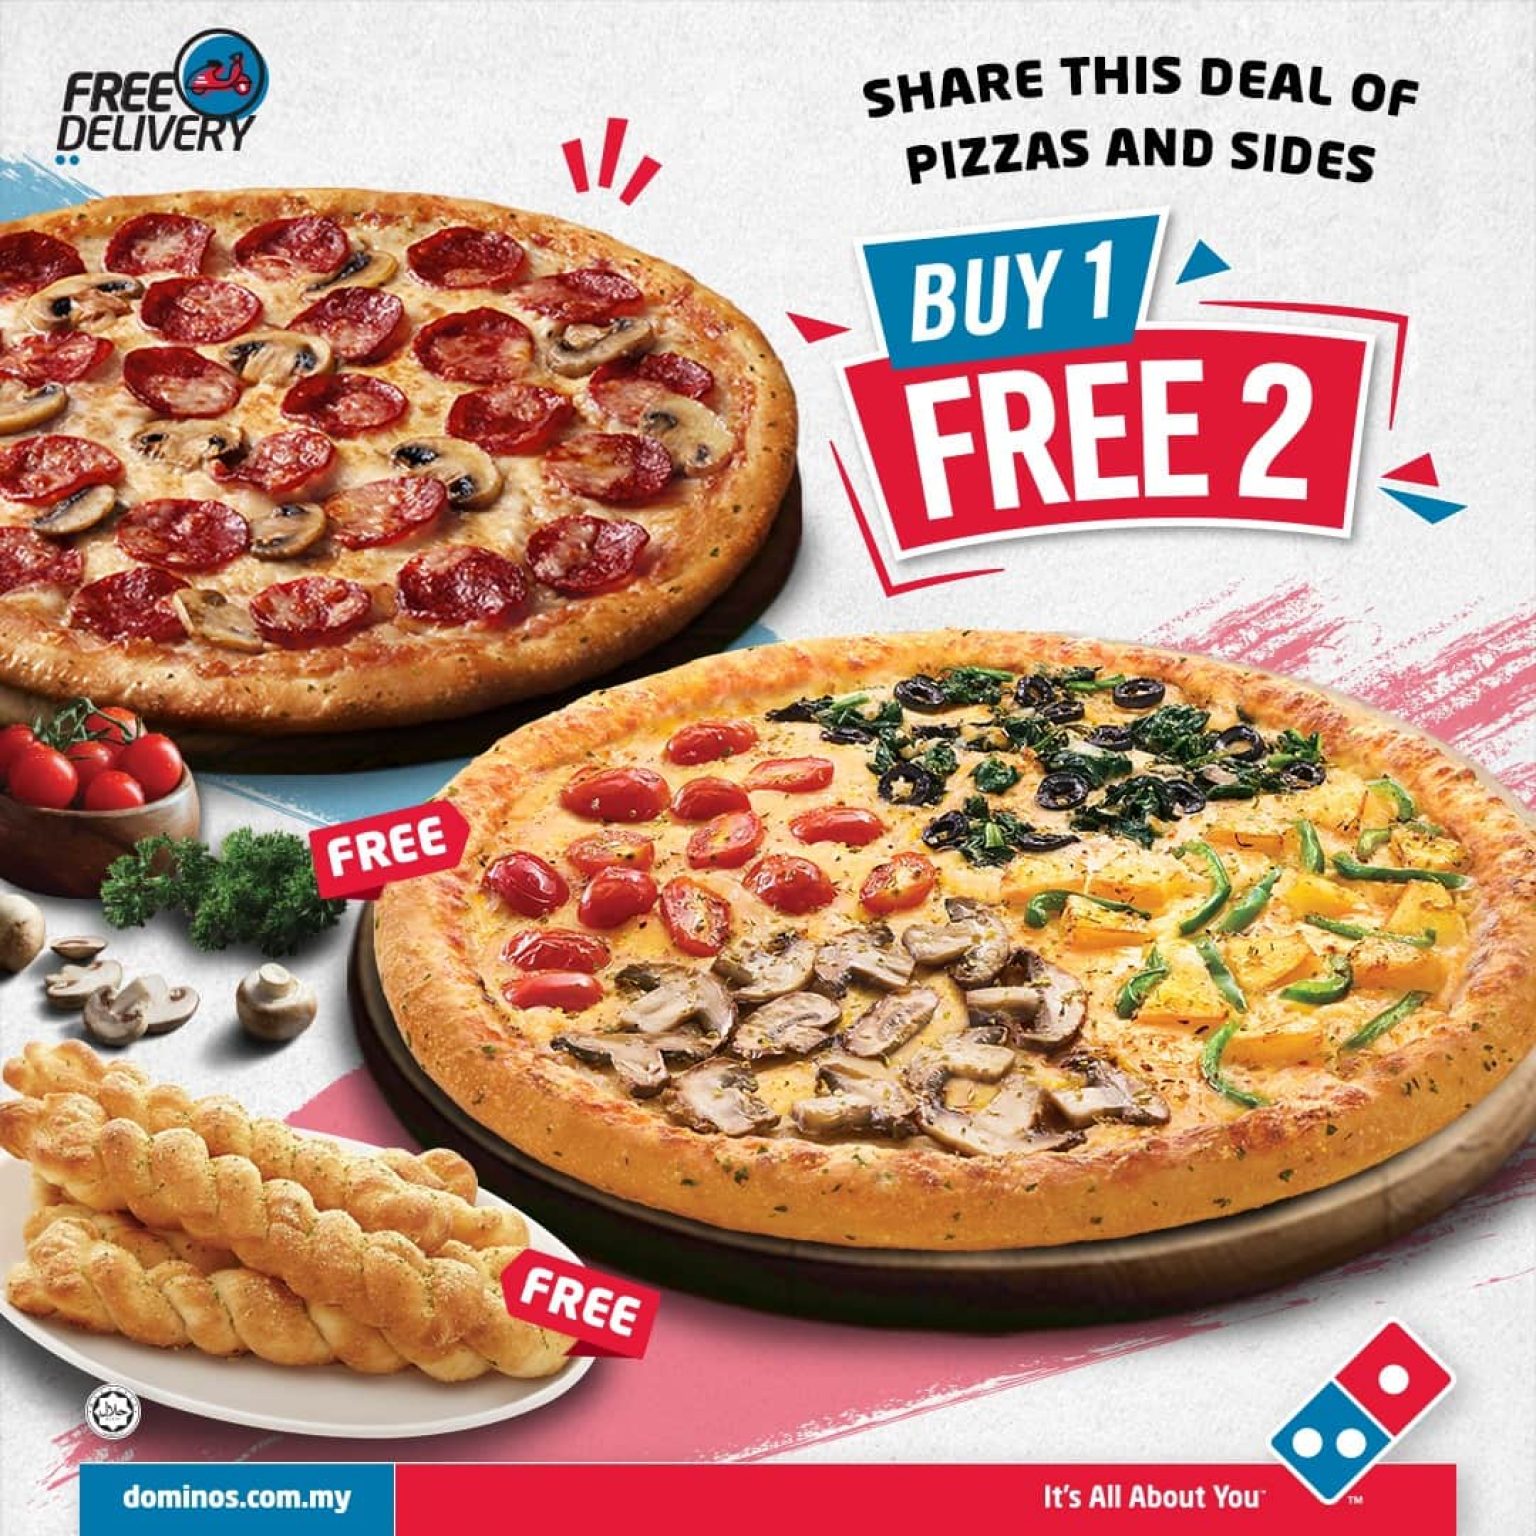 Domino's Pizza savings up to MORE than 50 with BUY 1 FREE 2 deal